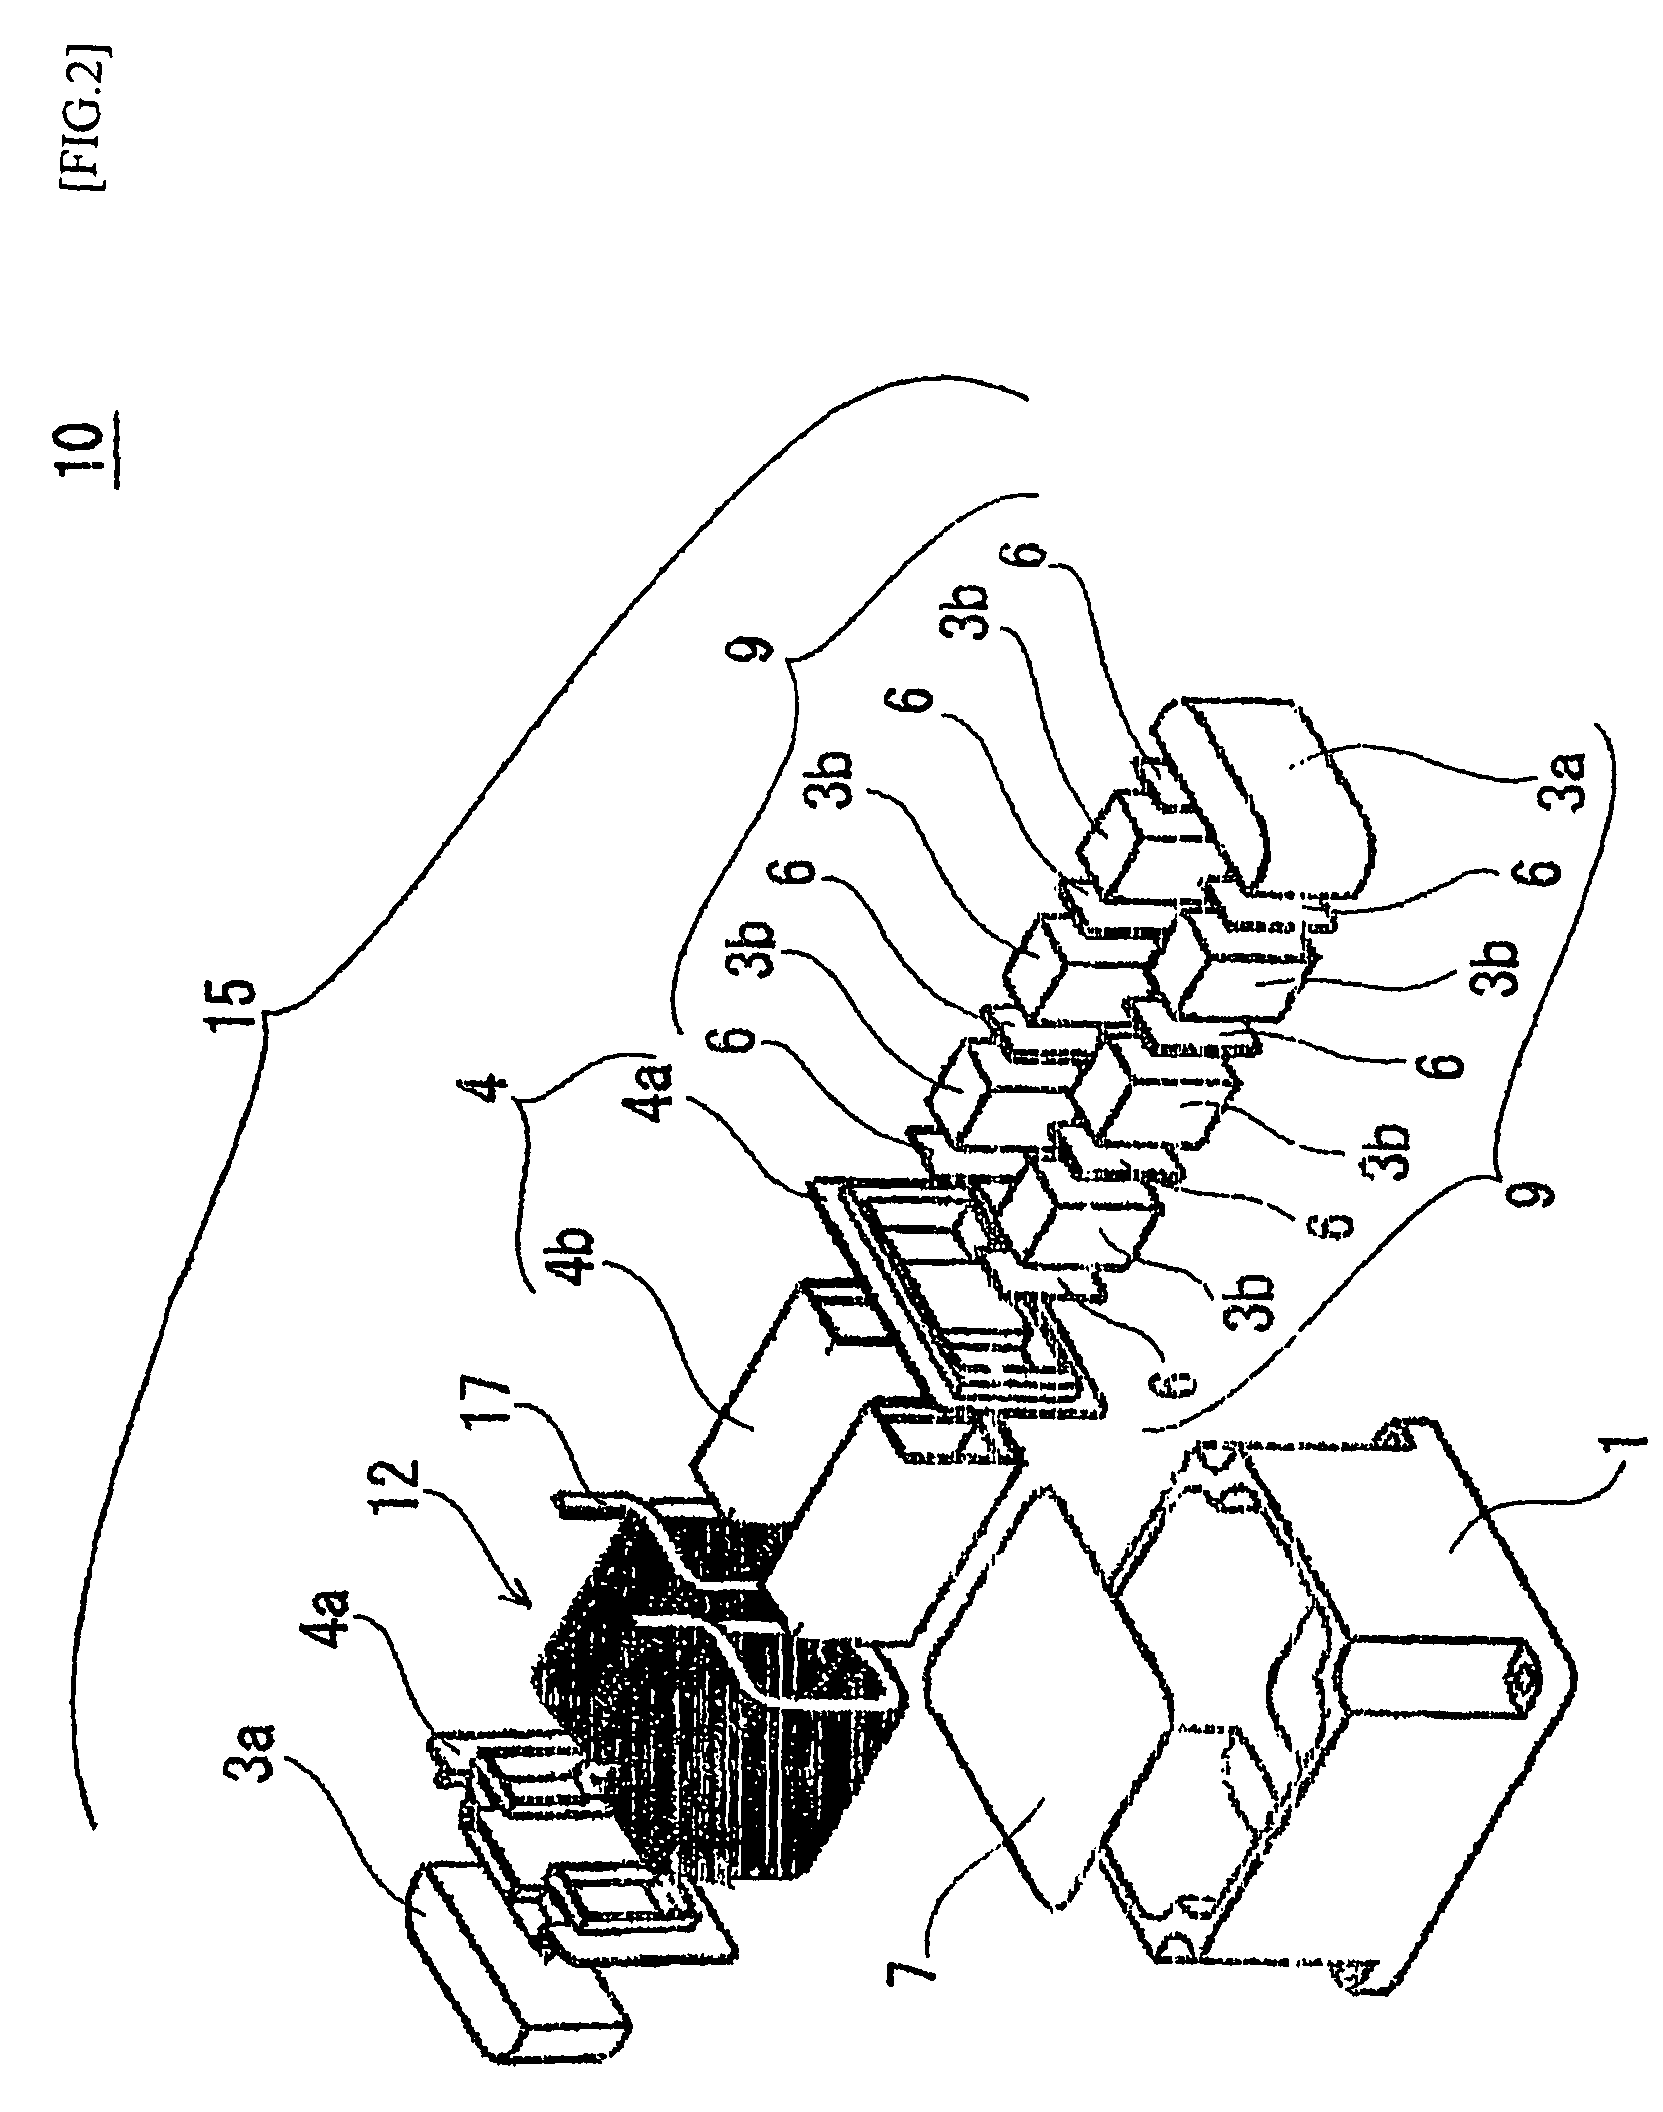 Method for forming coil